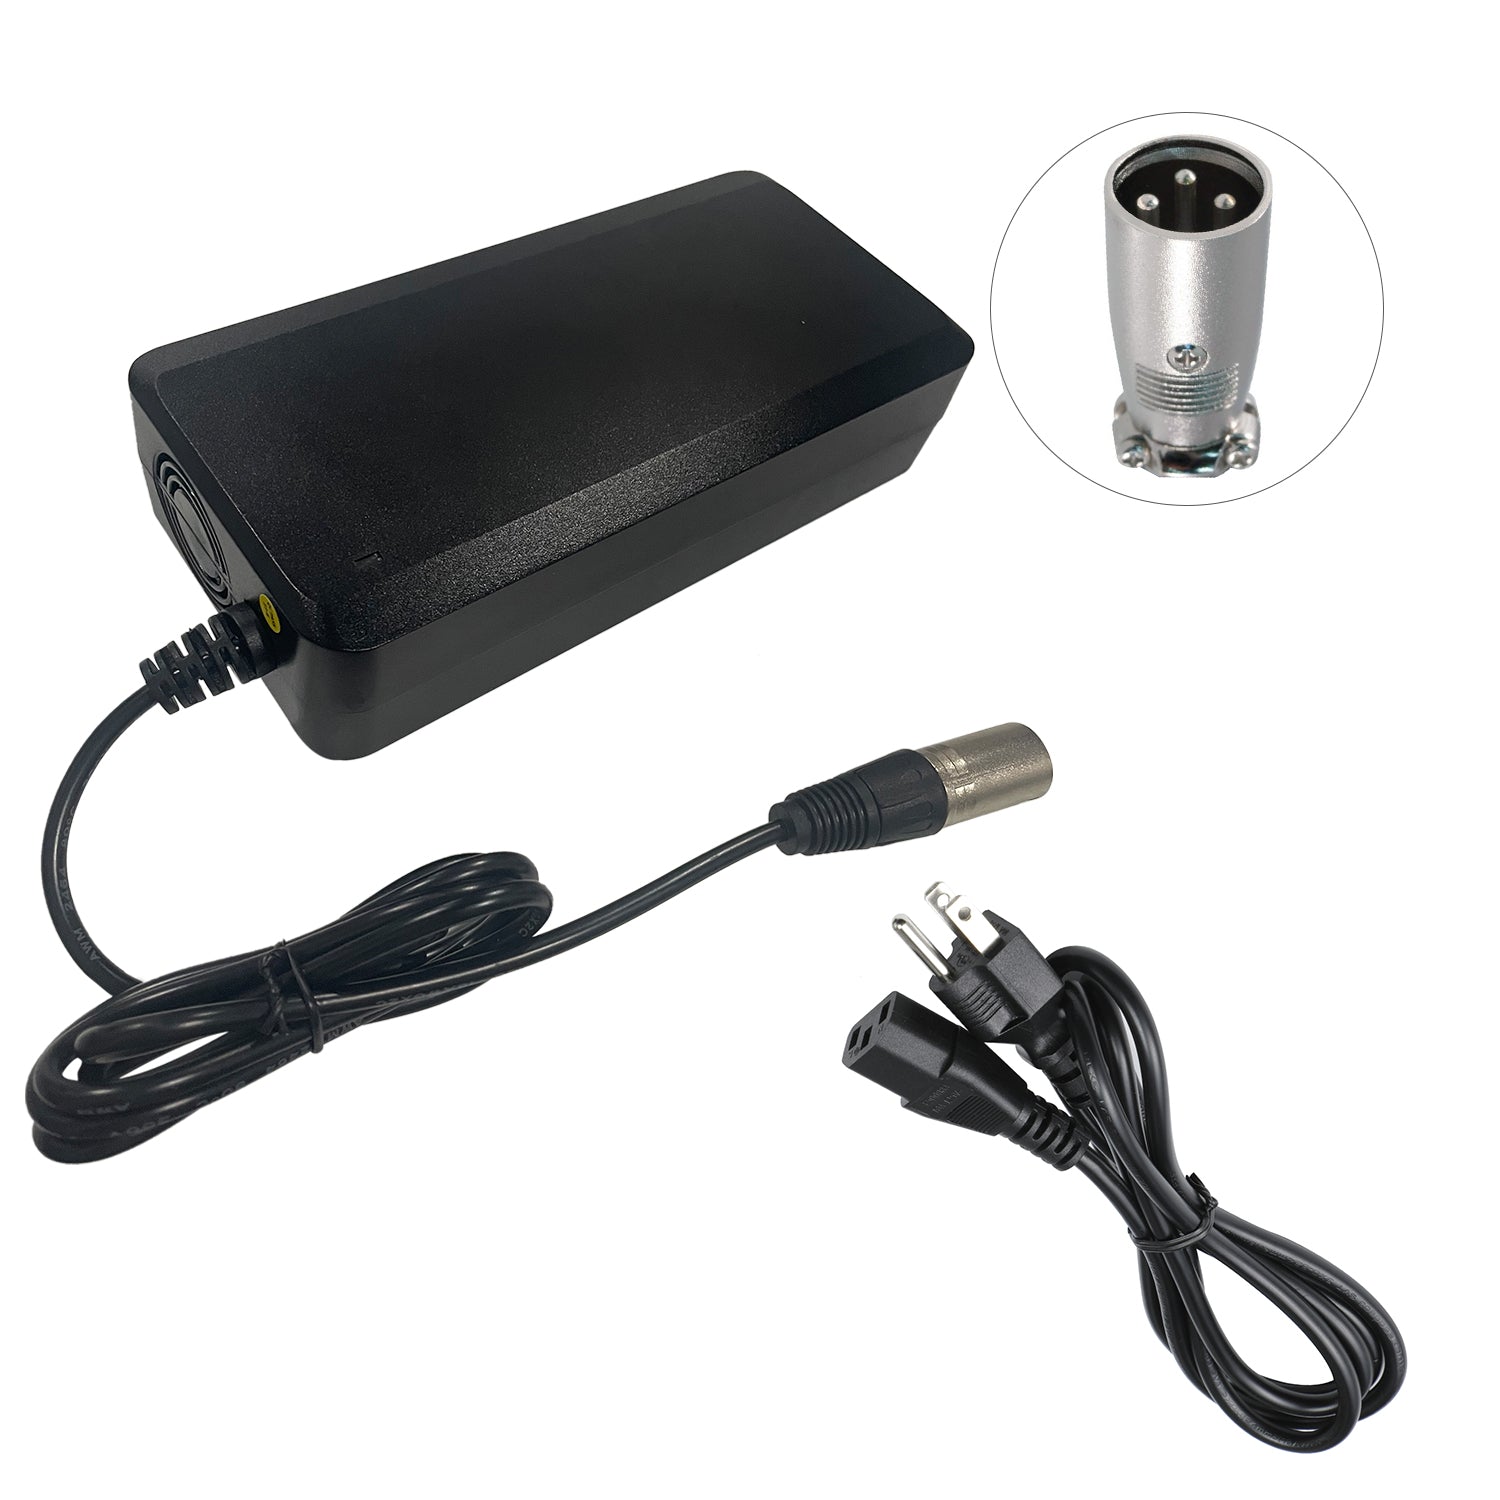 UL Listed 24V 8A Charger for Merits Series Scooters